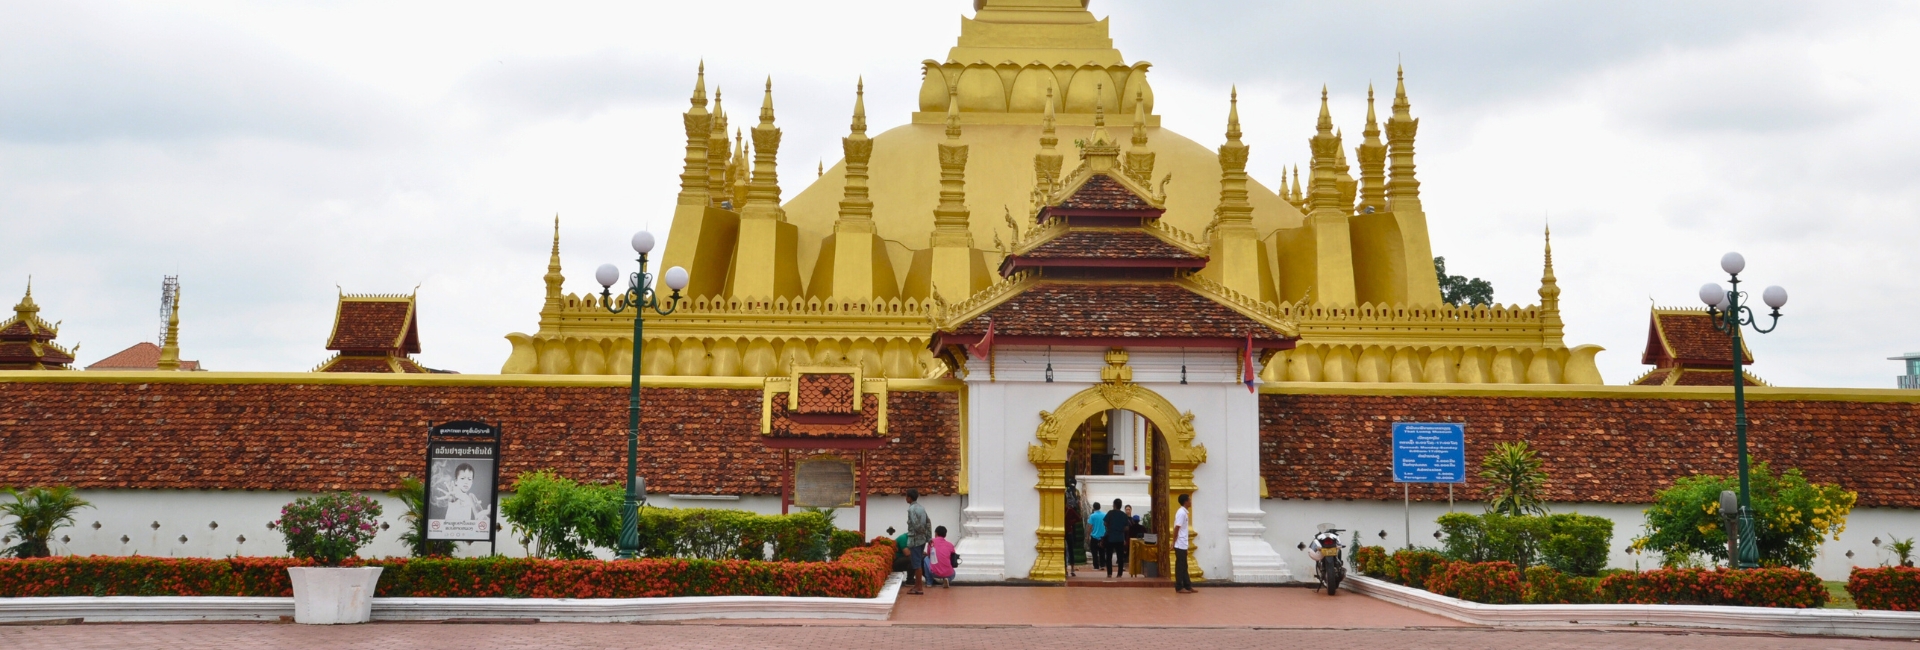 Pha That Luang Stupa: A Symbol of Laos’ Cultural Identity